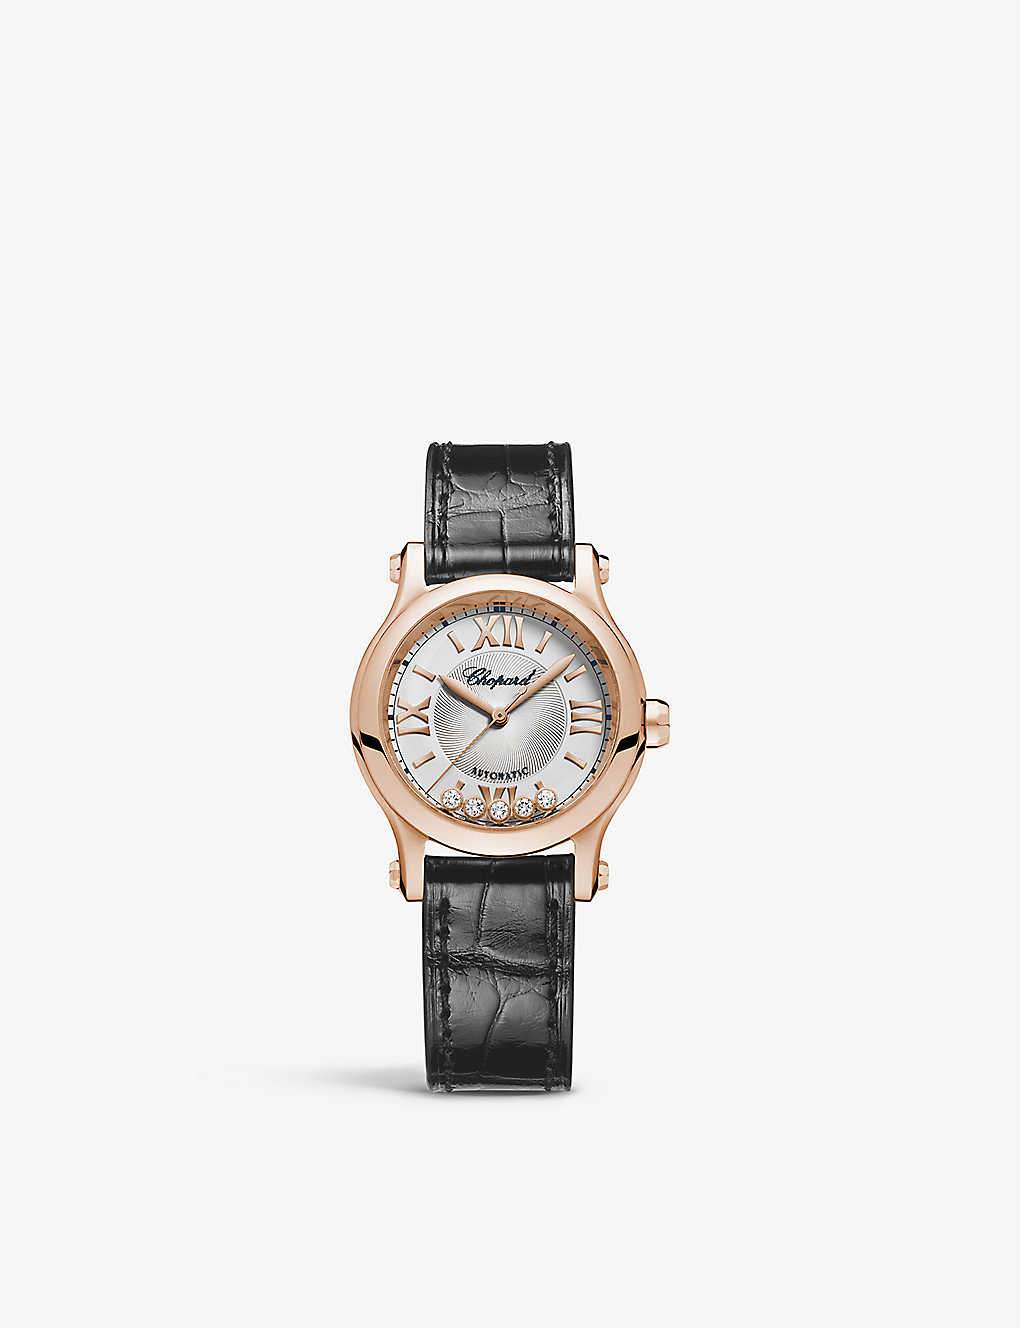 Chopard Womens 18-carat Rose Gold Happy Sport 274893-5011 18ct Rose-gold, Diamond And Leather Diamon